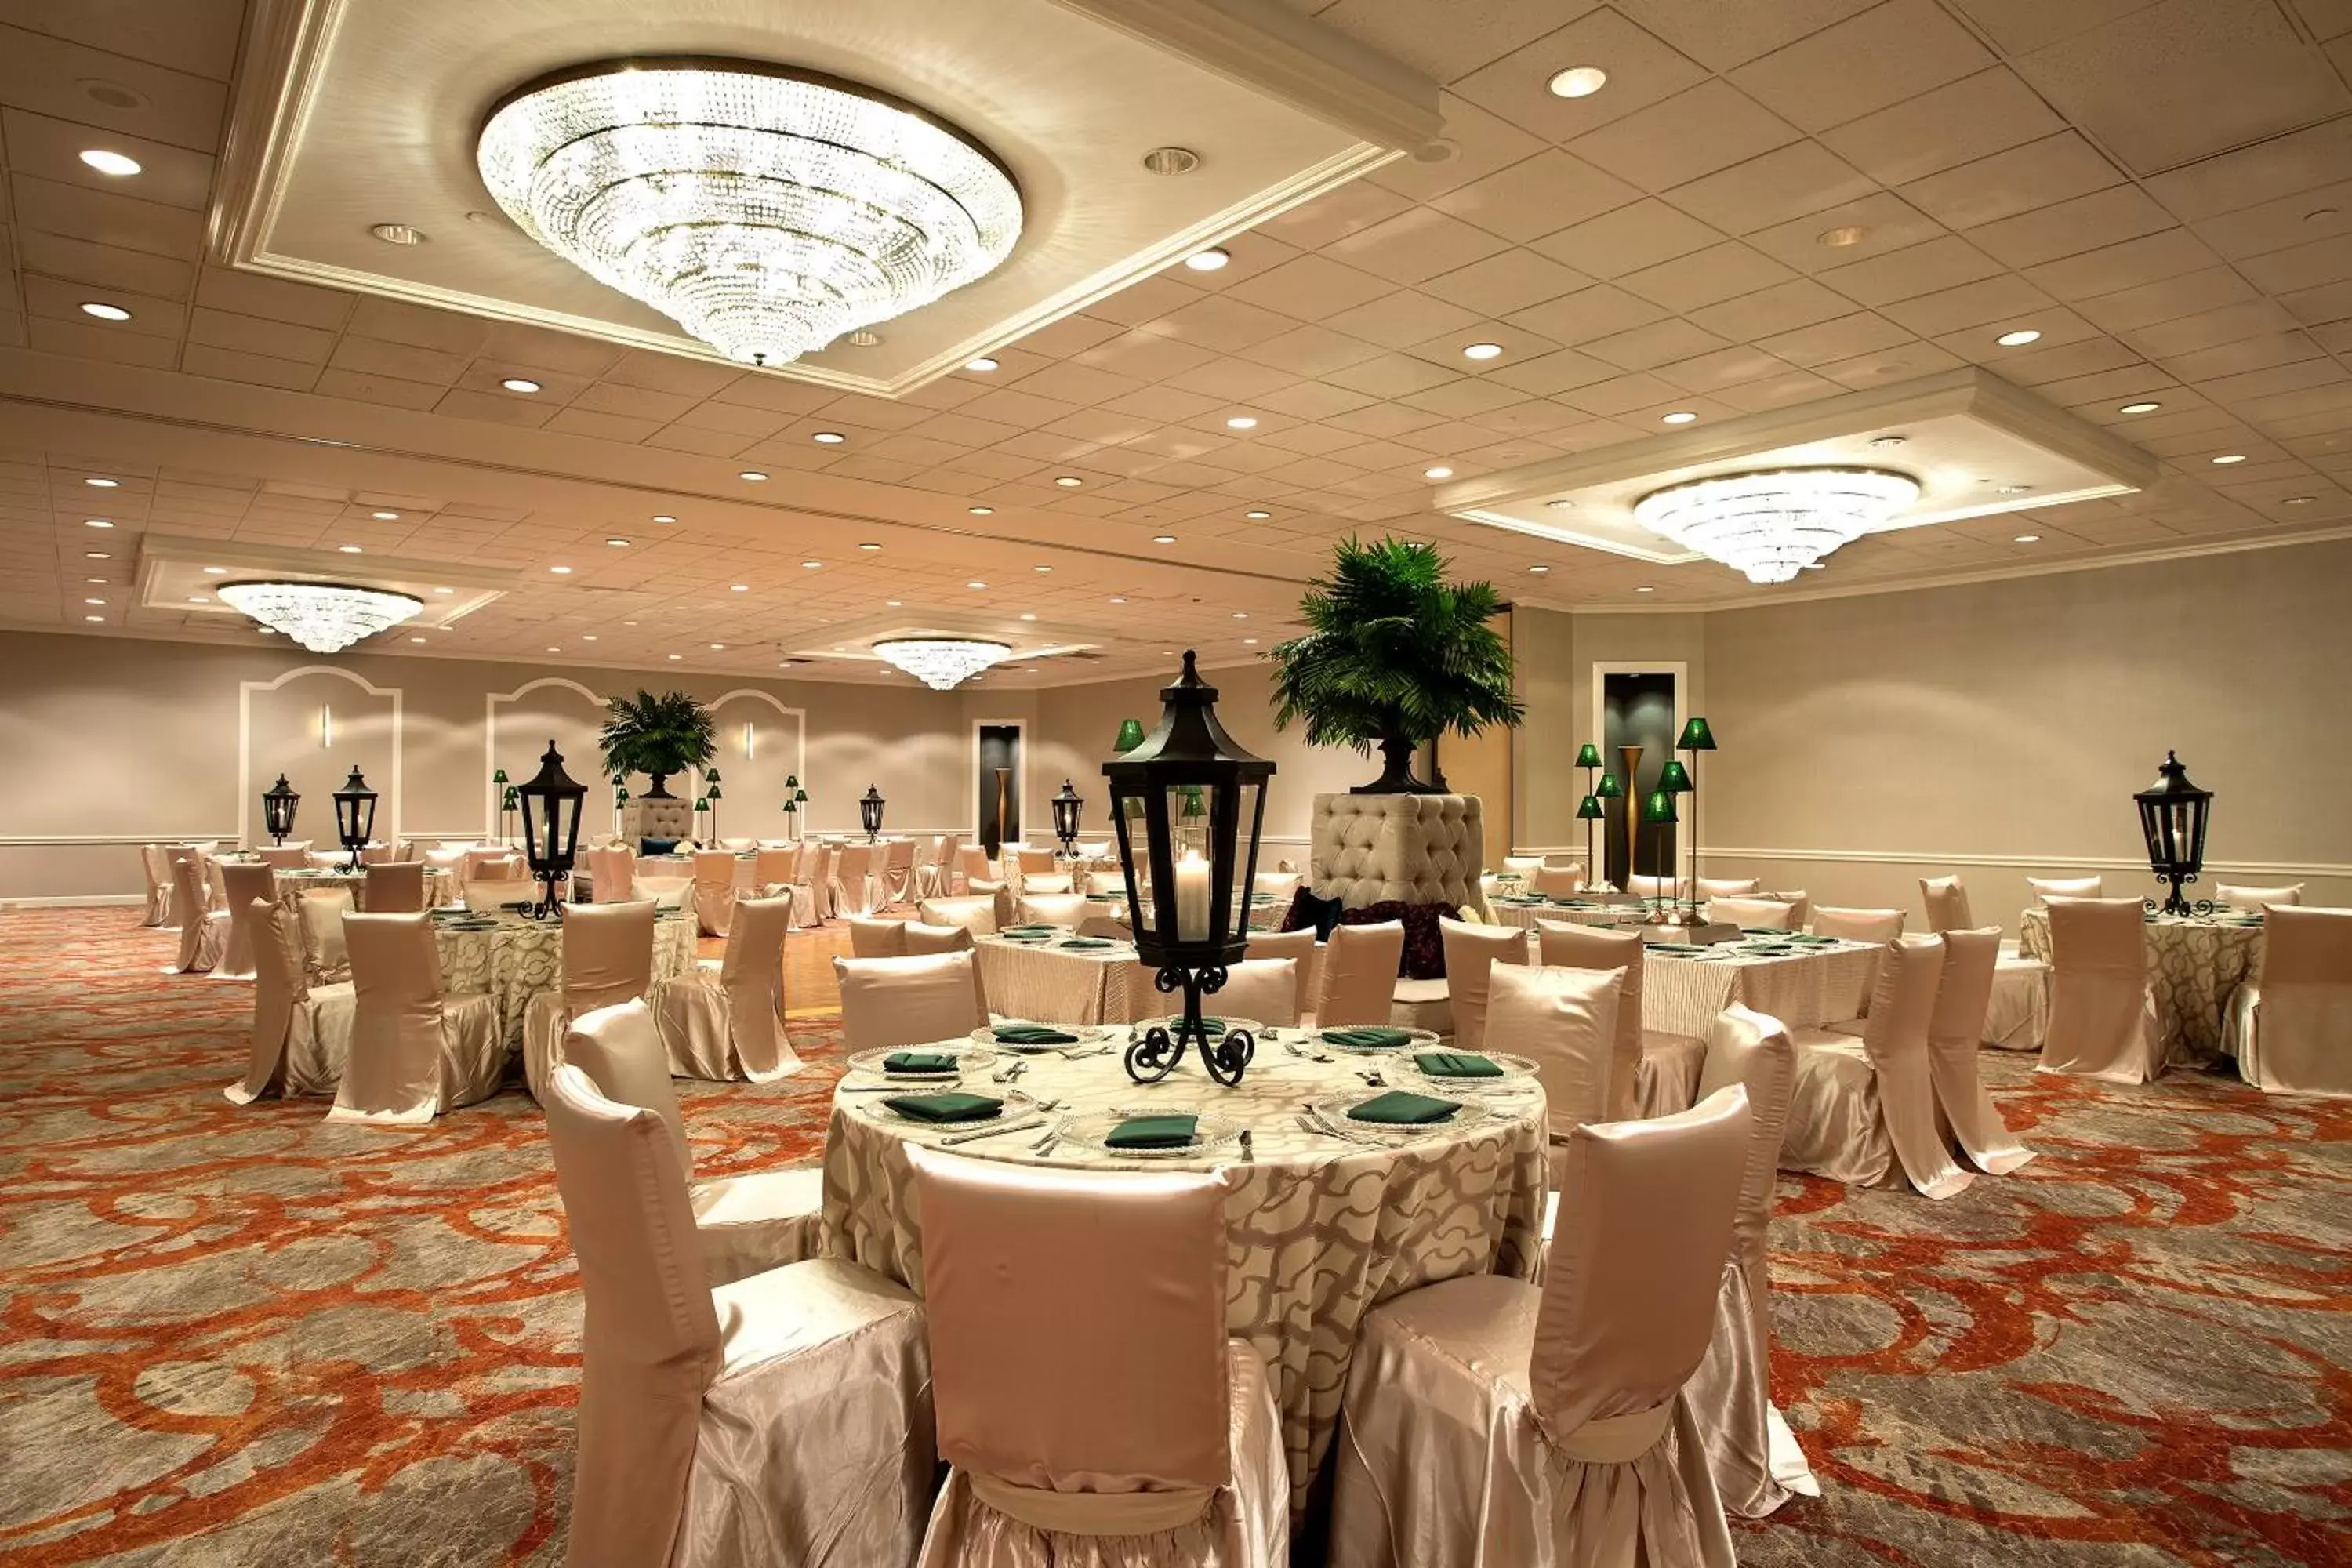 Banquet/Function facilities, Banquet Facilities in The Whitehall Houston